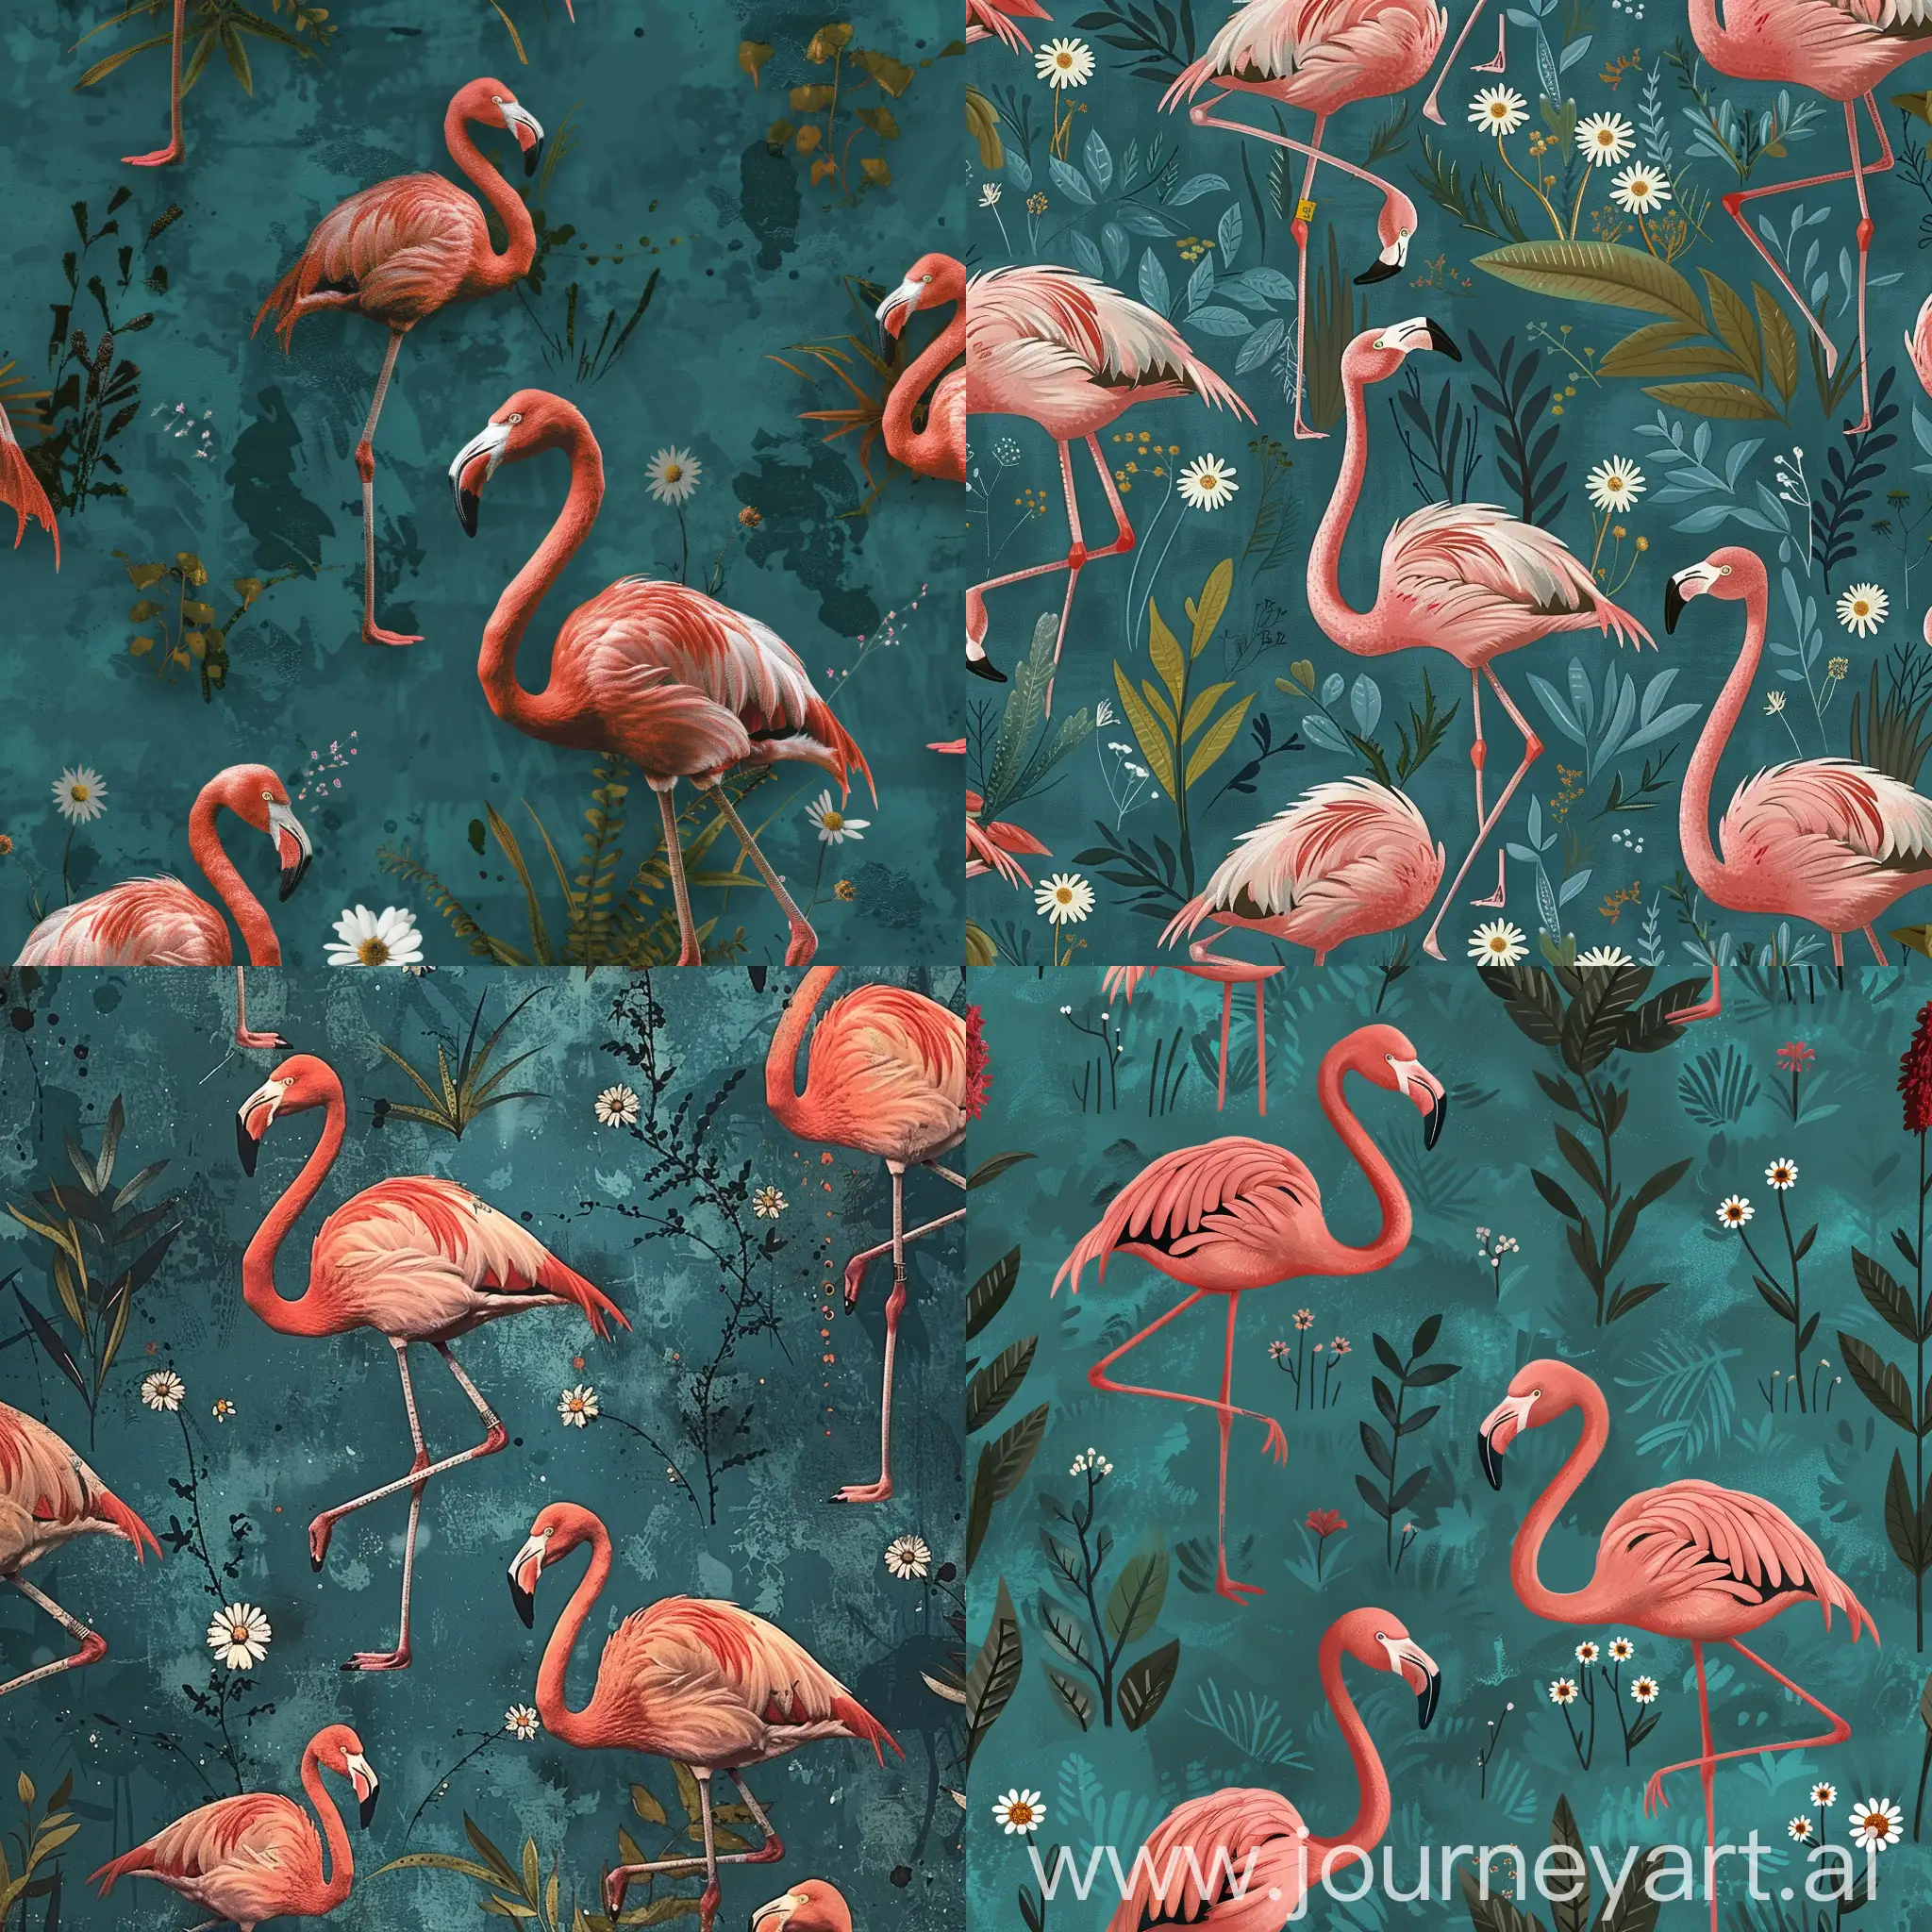 a wallpaper pattern that is made up of pink flamingos on a teal background with some small white daisies and dark green plants